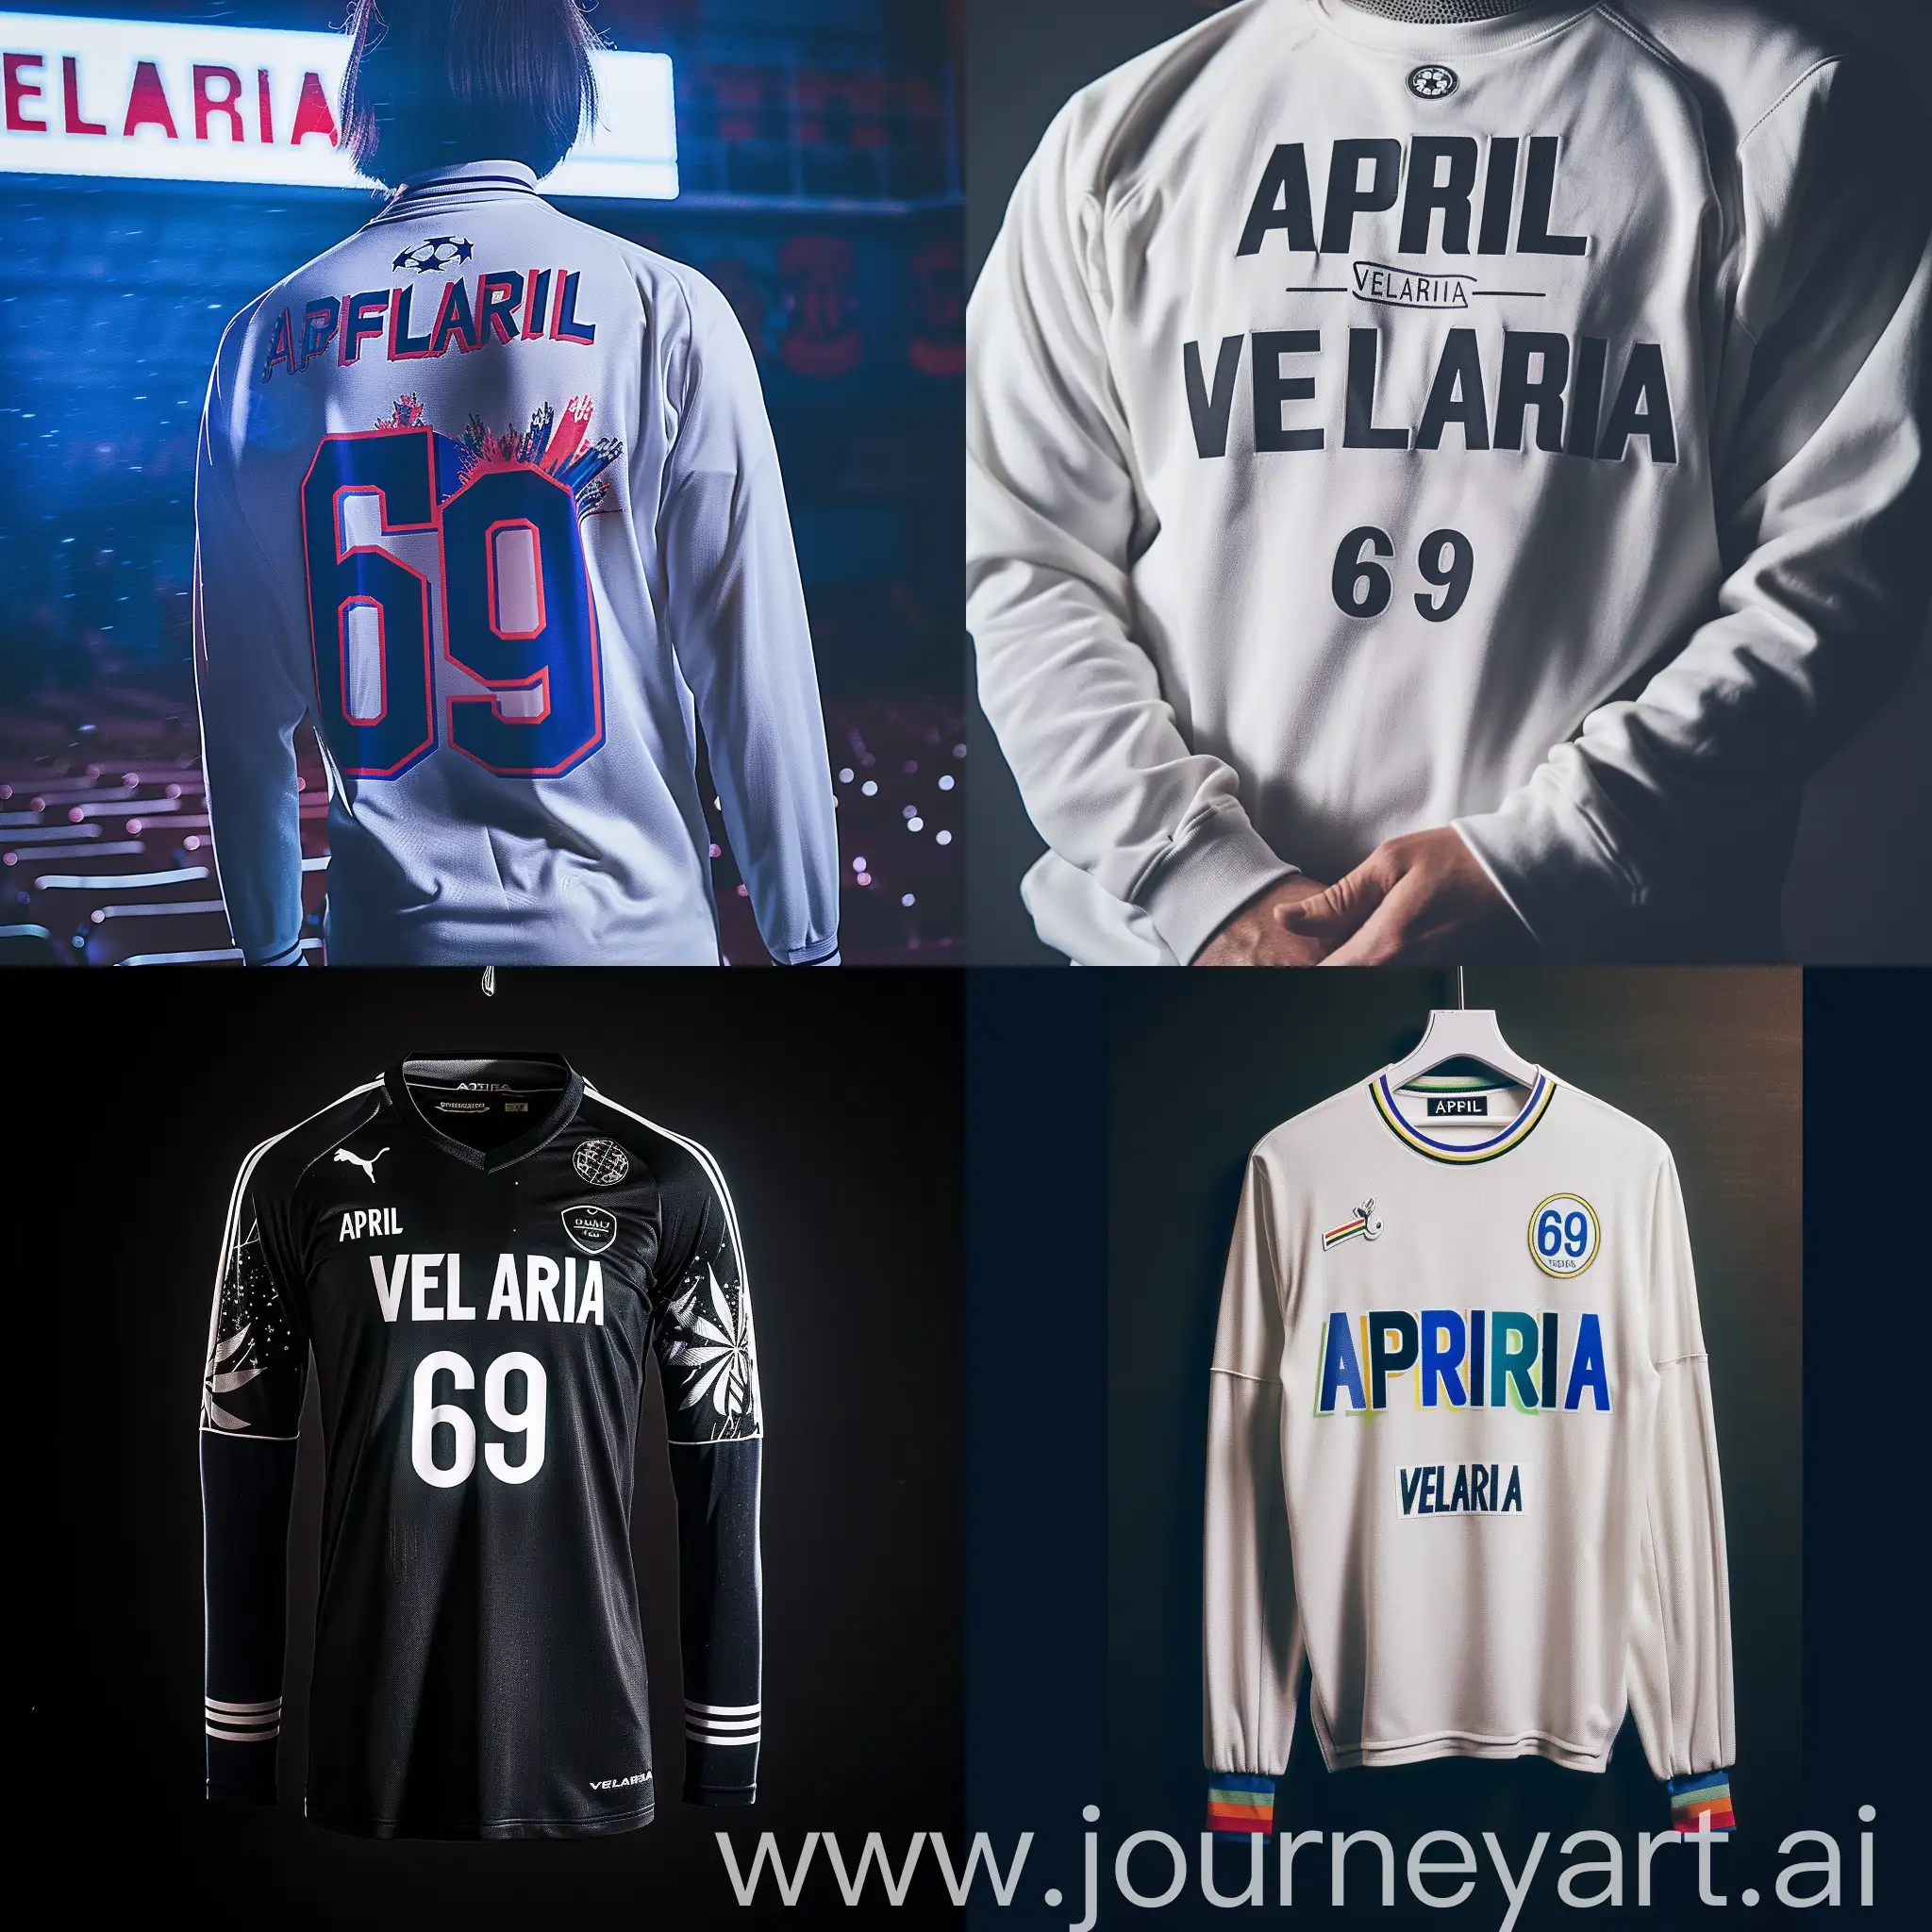 Maison-Margiela-Inspired-Football-Jersey-with-APRIL-VELARIA-and-Number-69